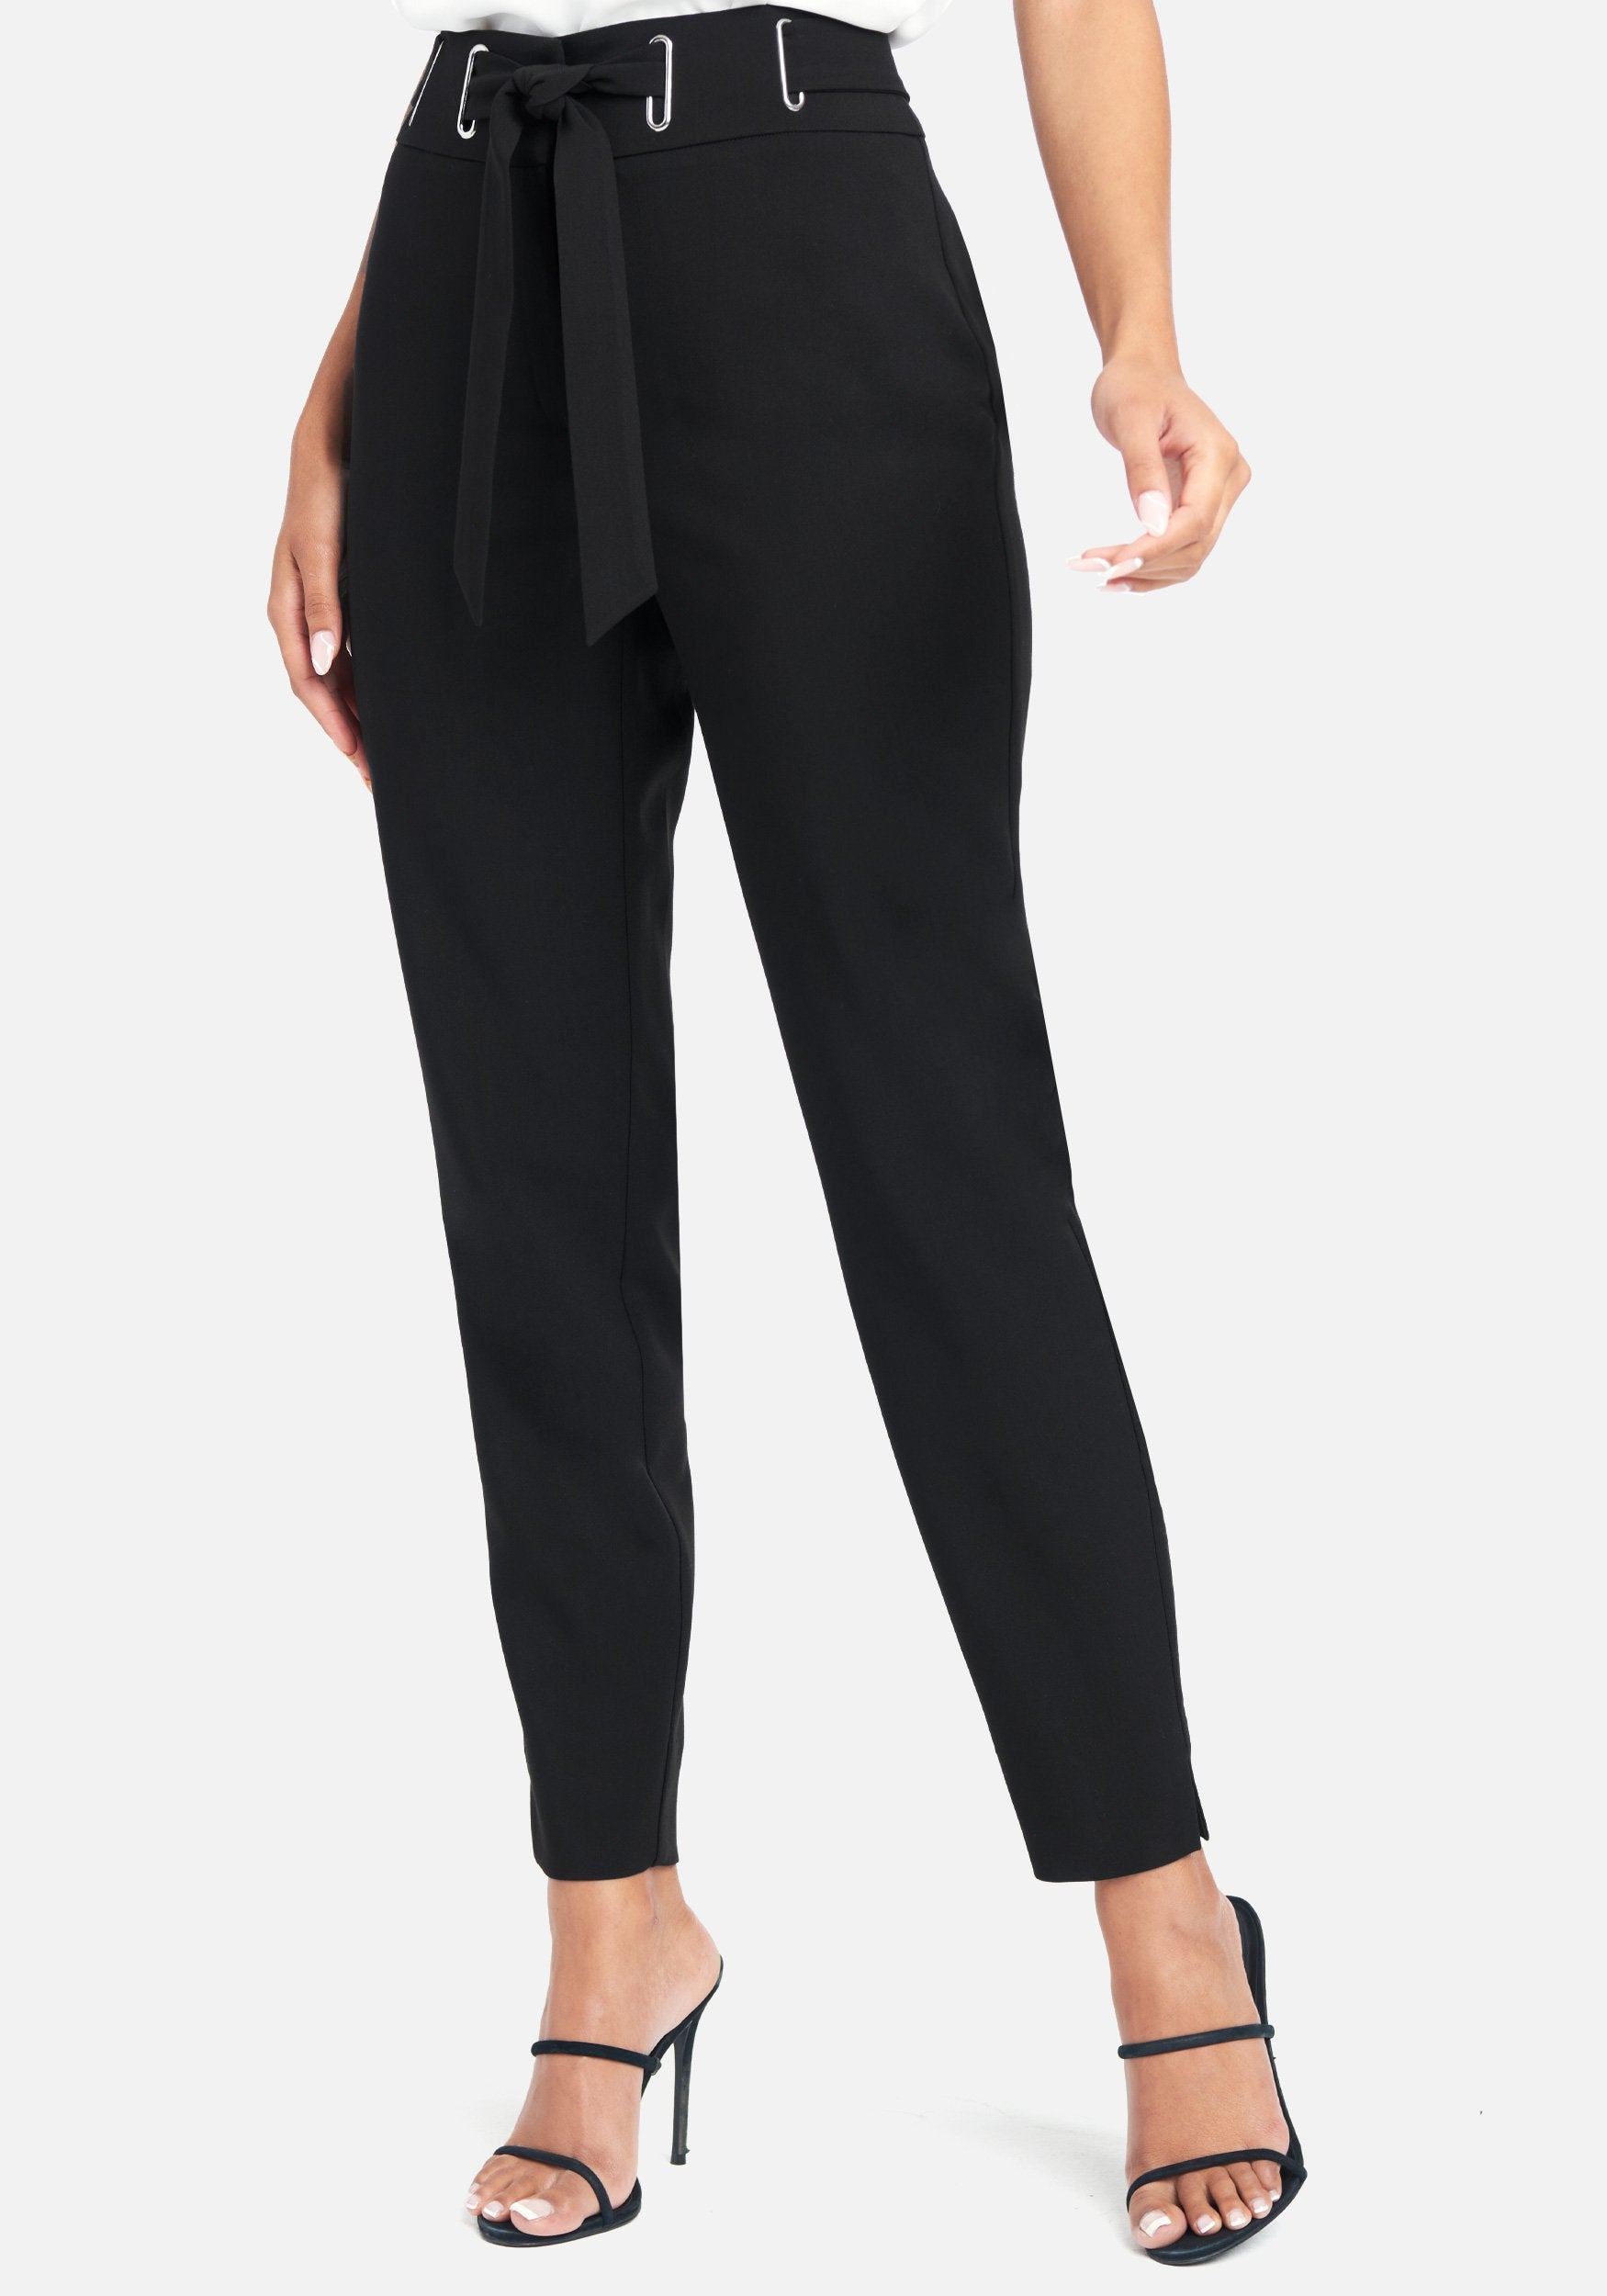 Bebe Women's Stretch Twill Grommet Pant, Size 0 in Black Spandex/Viscose